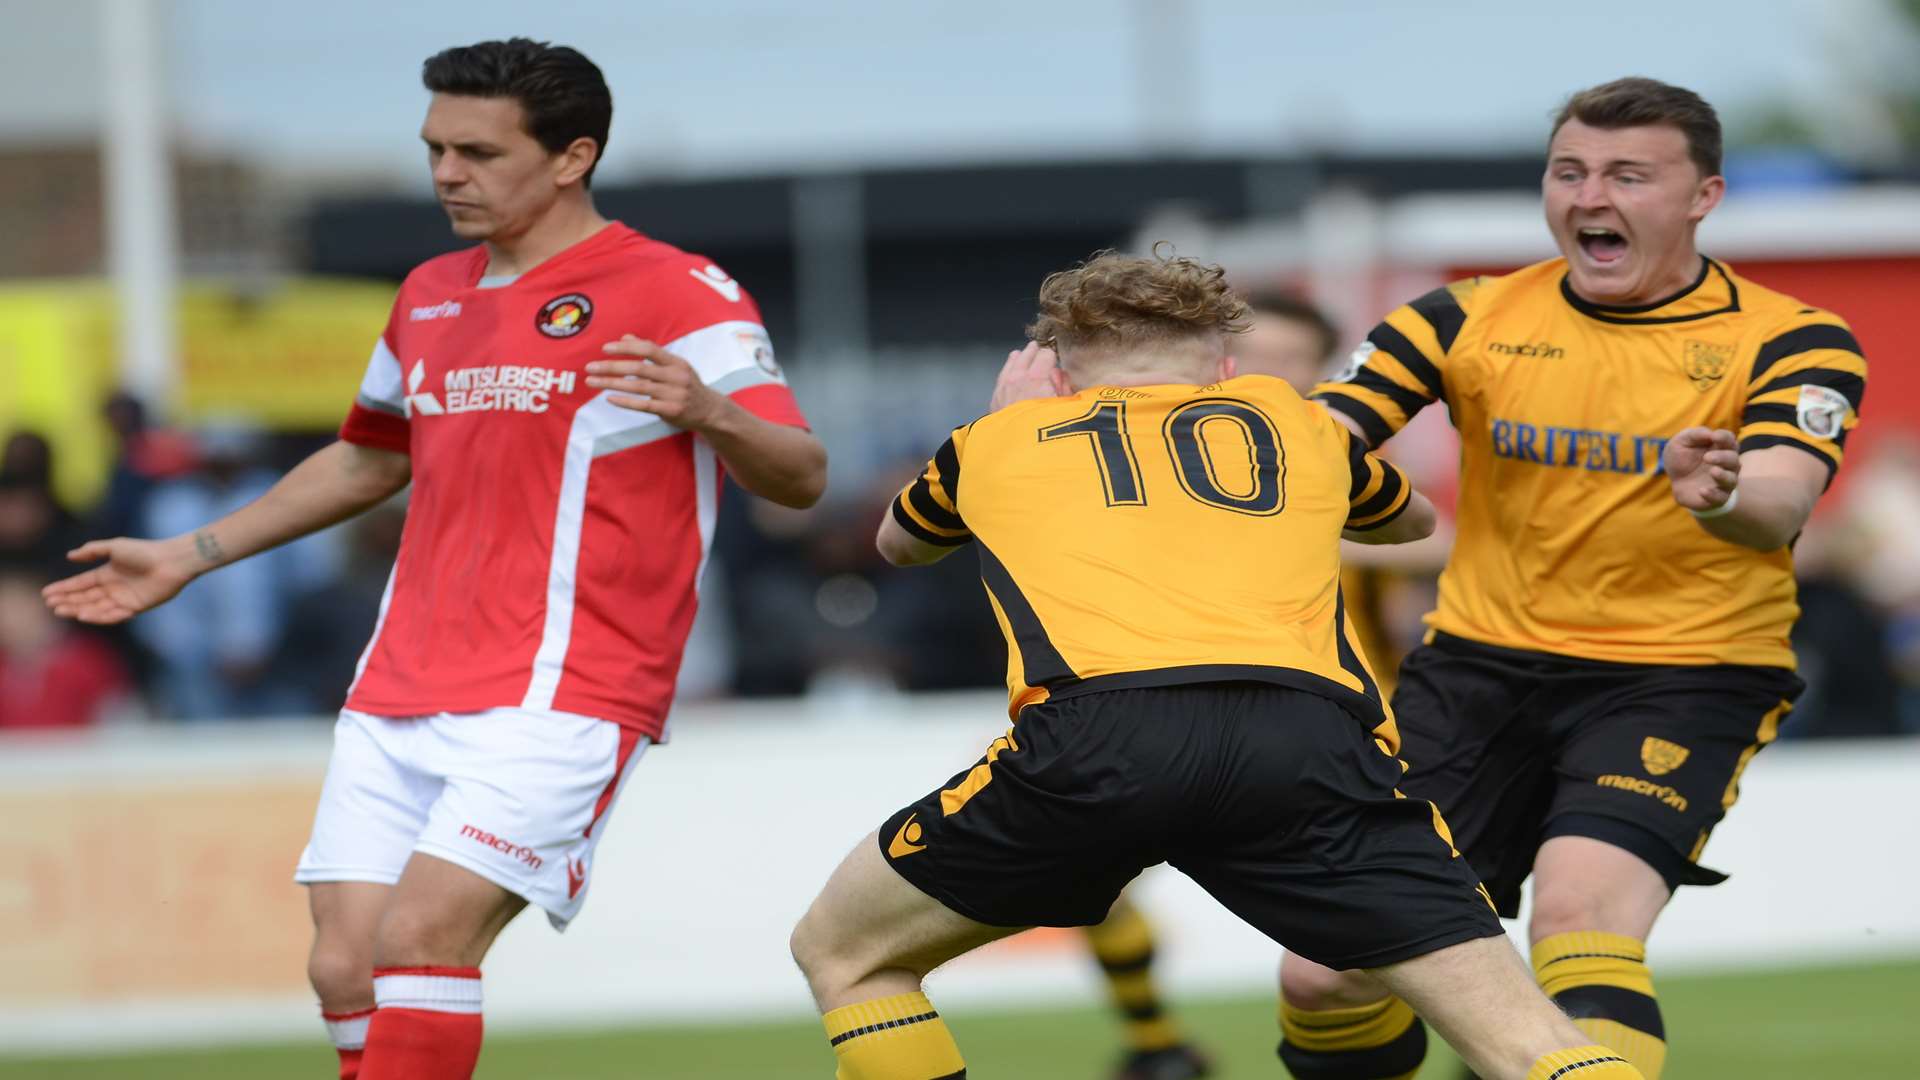 Bobby-Joe Taylor (10) put Maidstone level at 1-1. Picture: Gary Browne